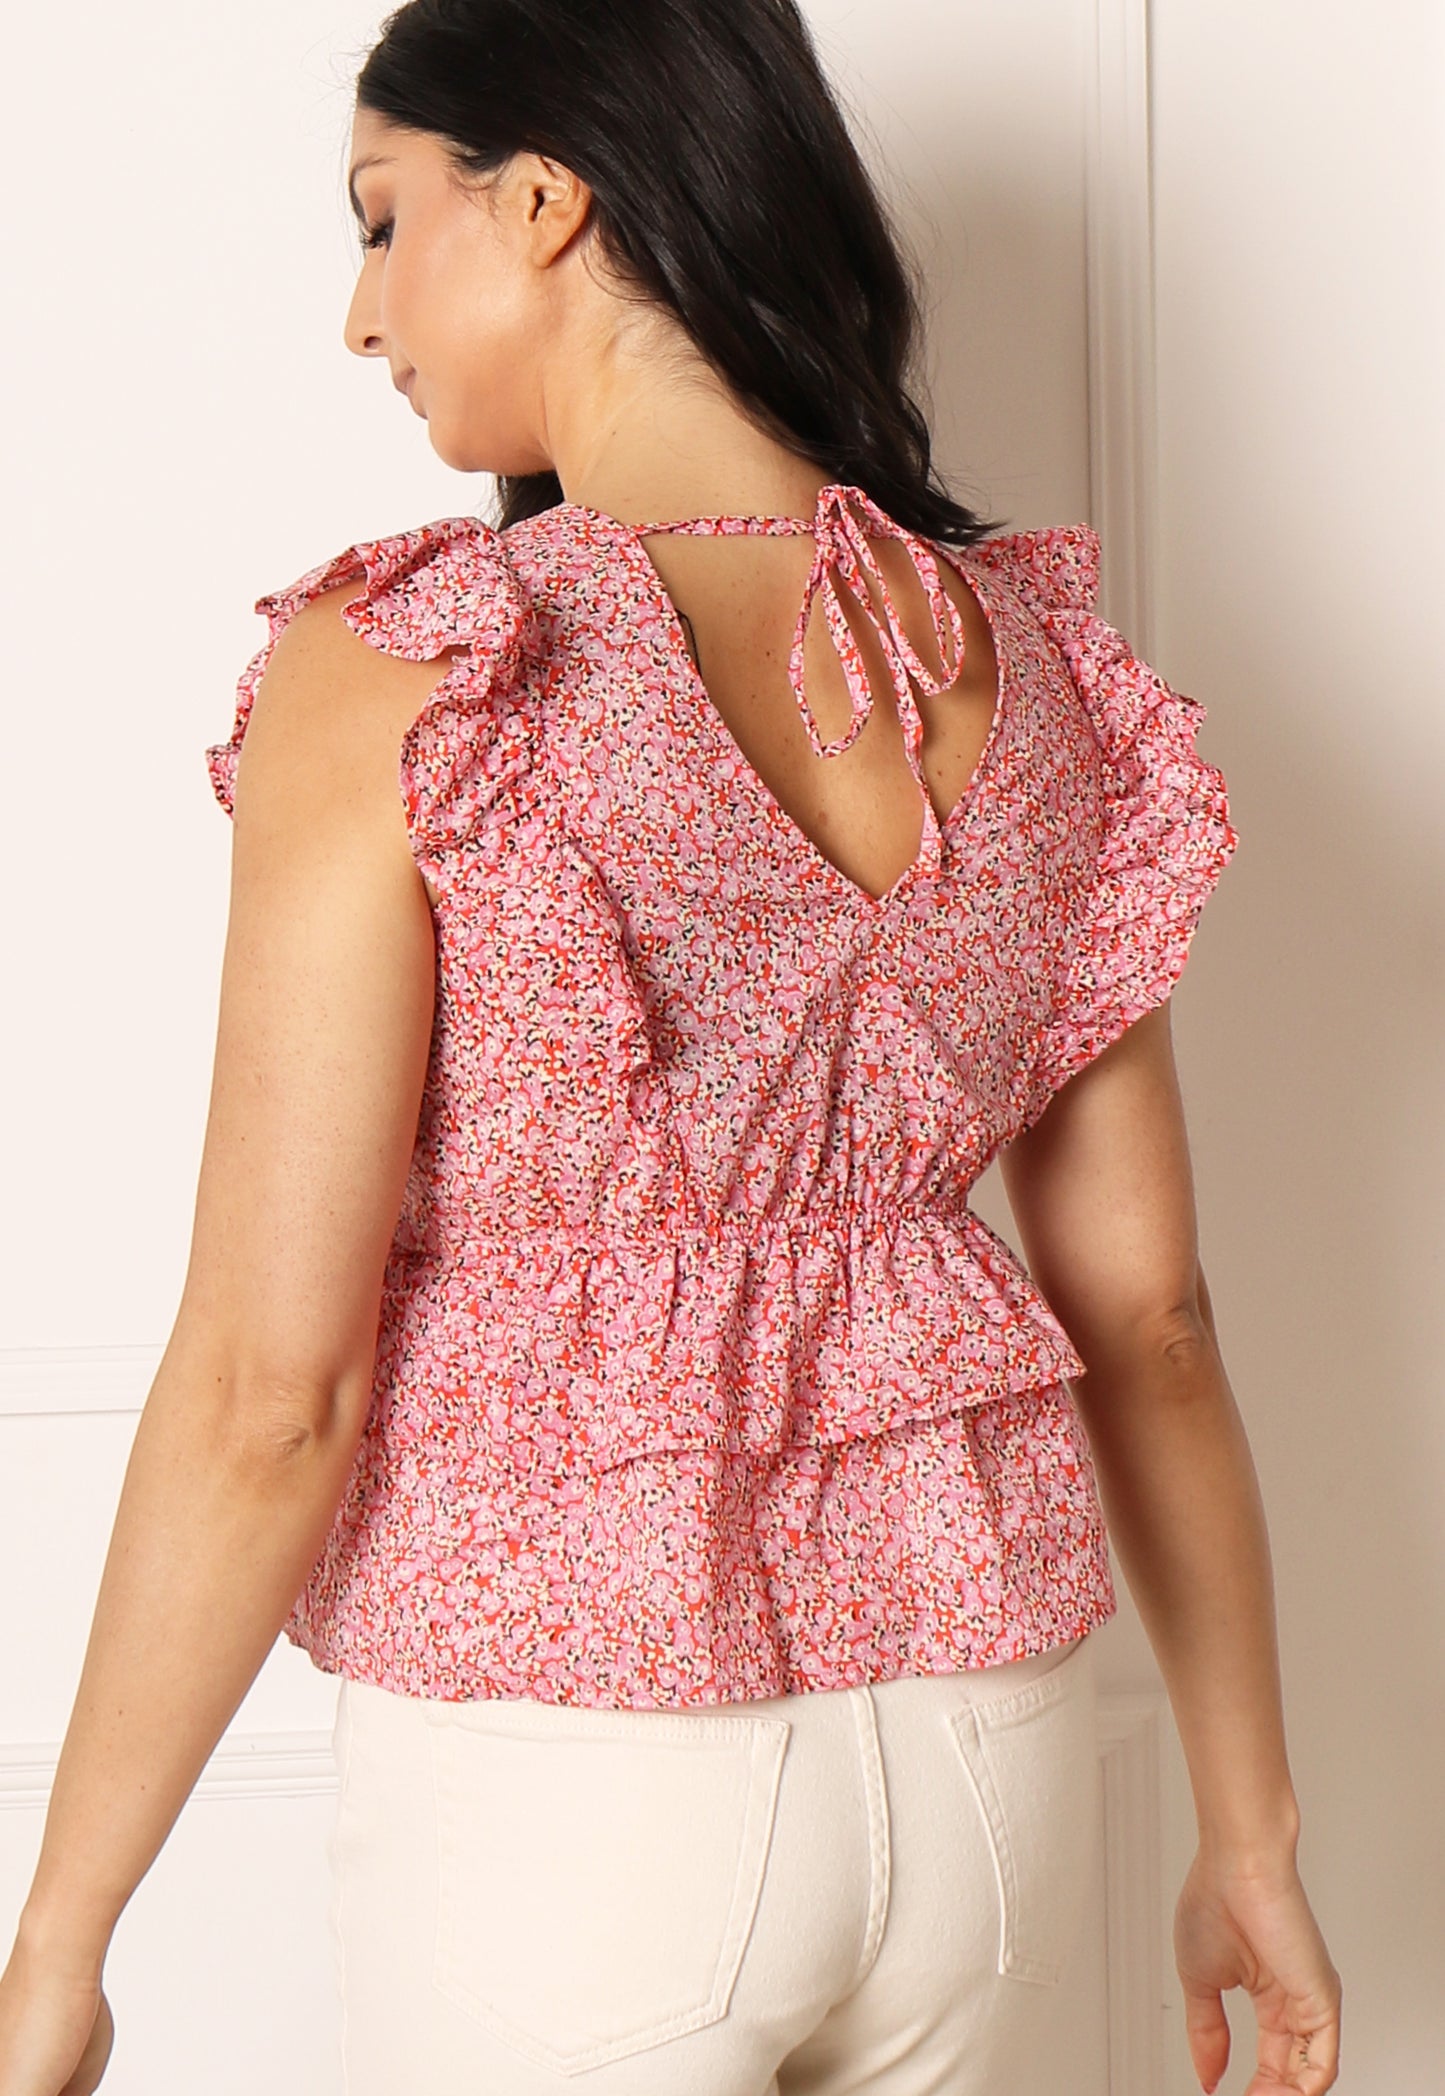 
                  
                    VERO MODA Ditsy Floral Print Frill Detail Cotton Blouse Top in Red & Pink - One Nation Clothing
                  
                